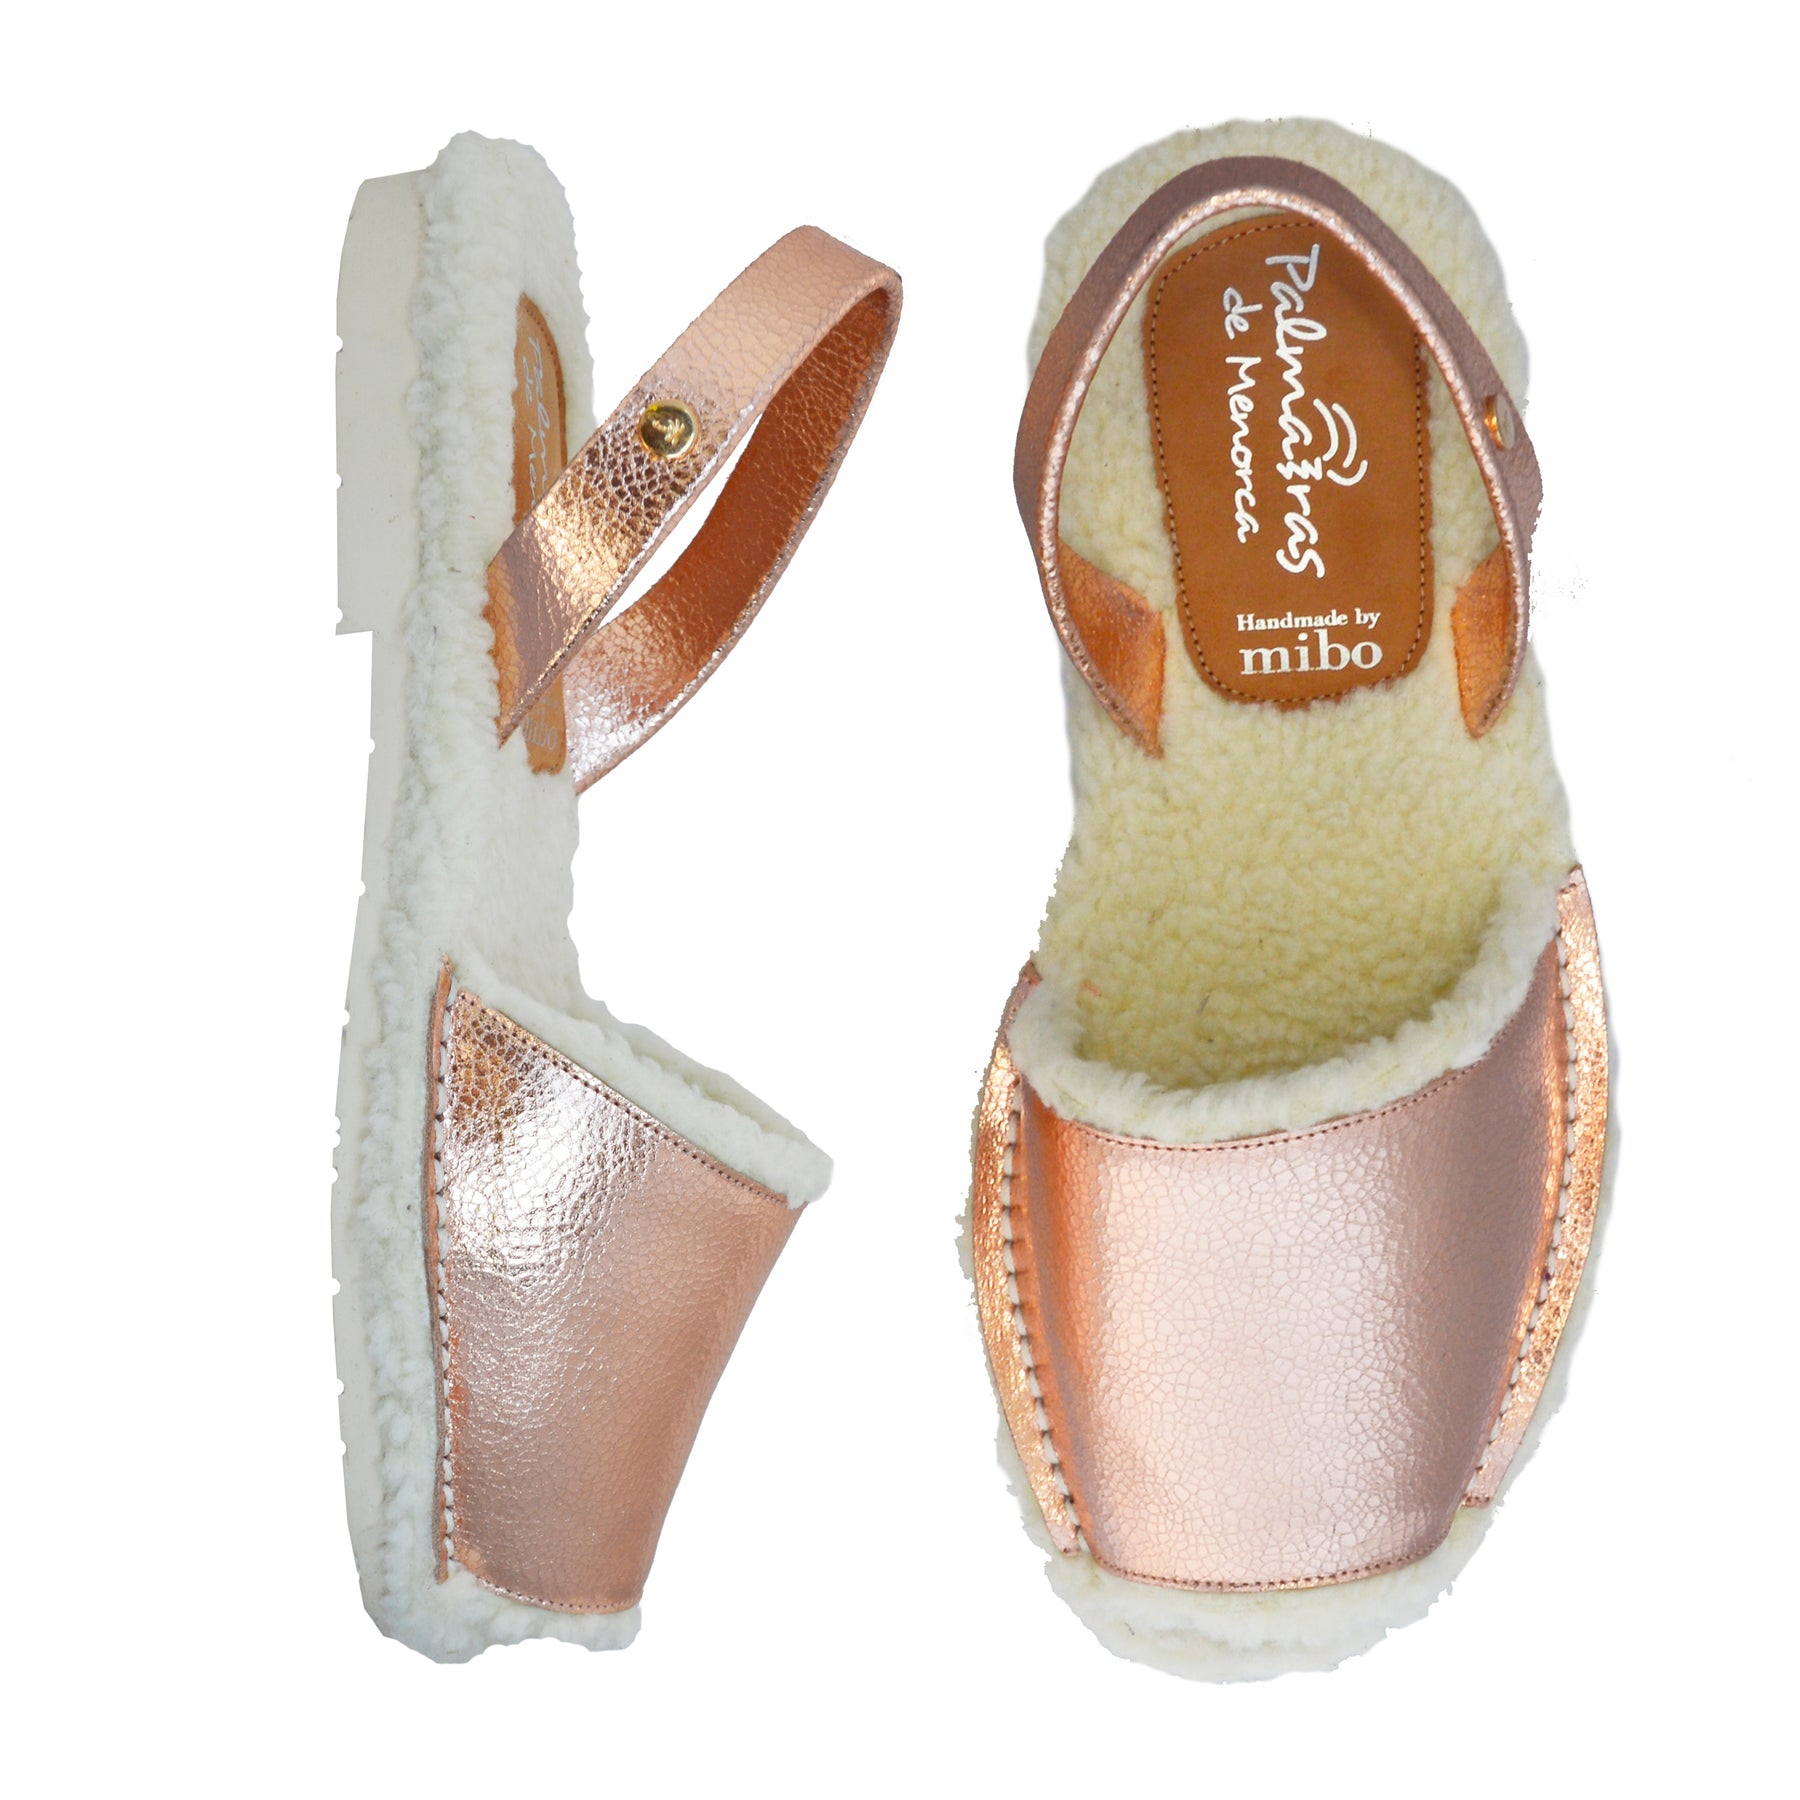 rose gold leather wool lined menorcan avarca sandal slippers